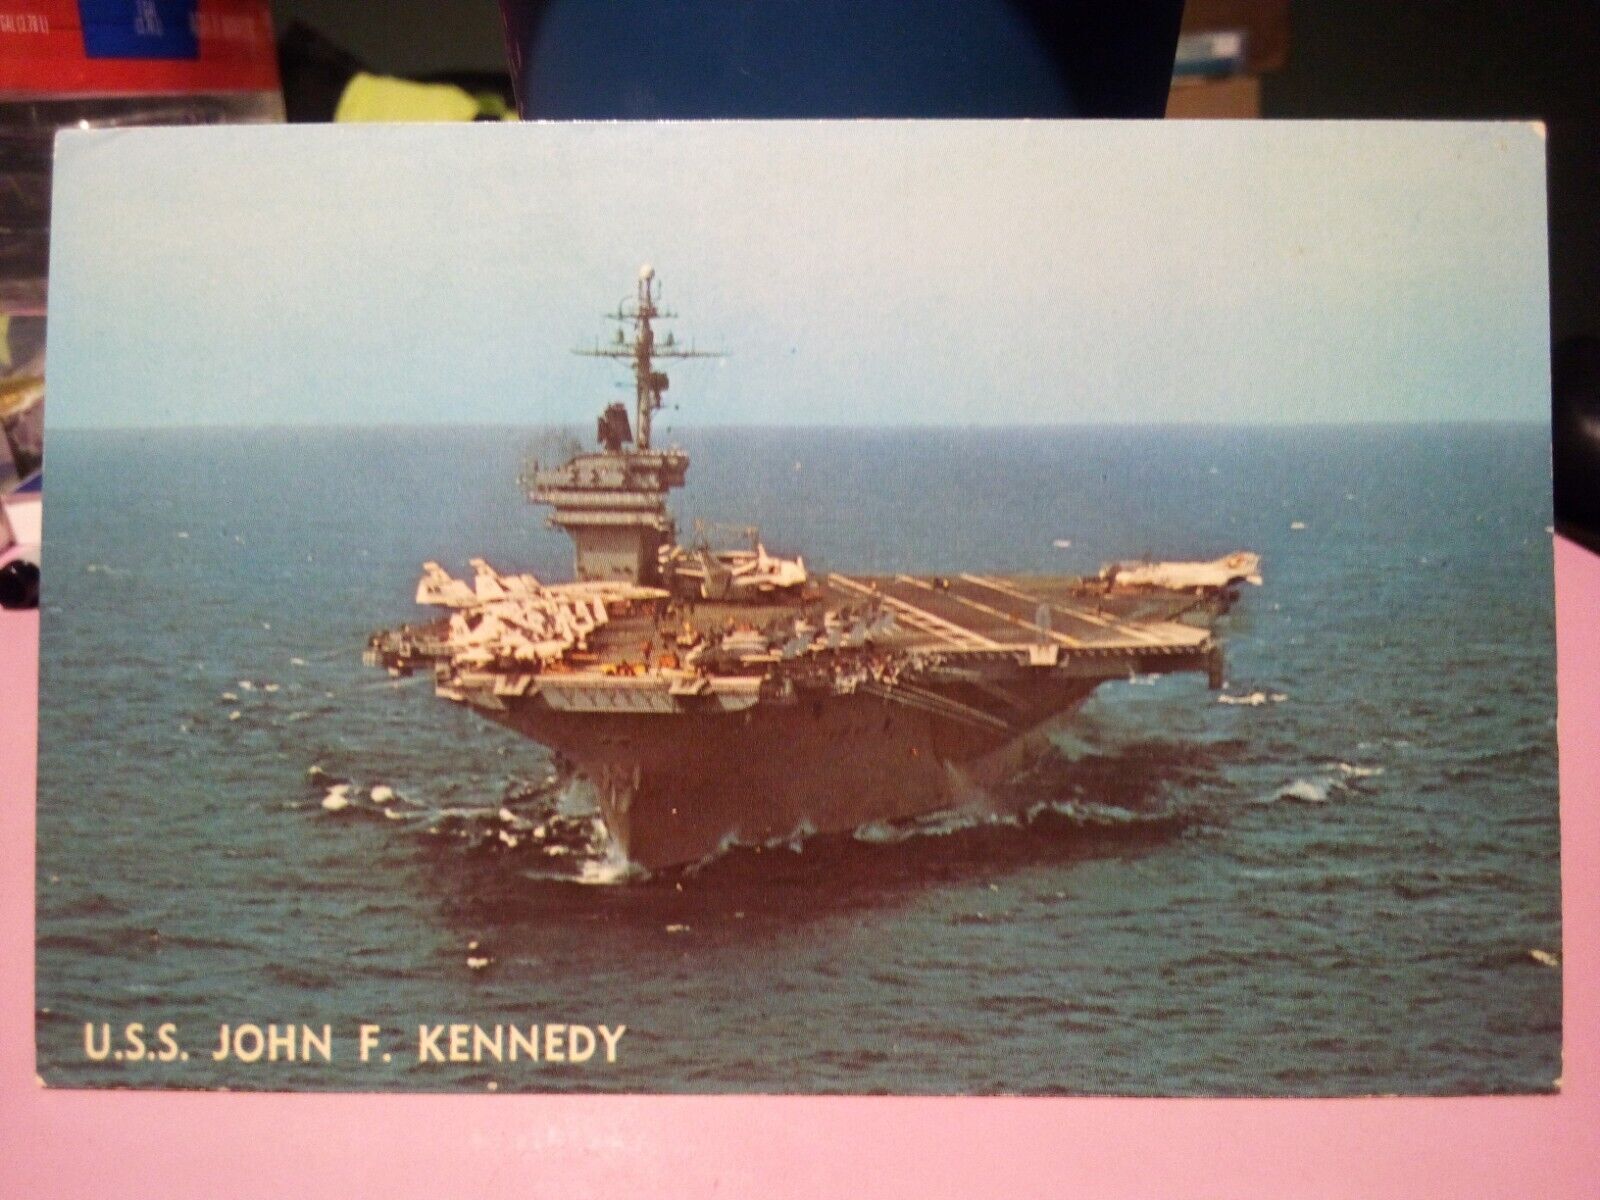 U.S.S. John F. Kennedy warship Aircraft Carrier airplanes 